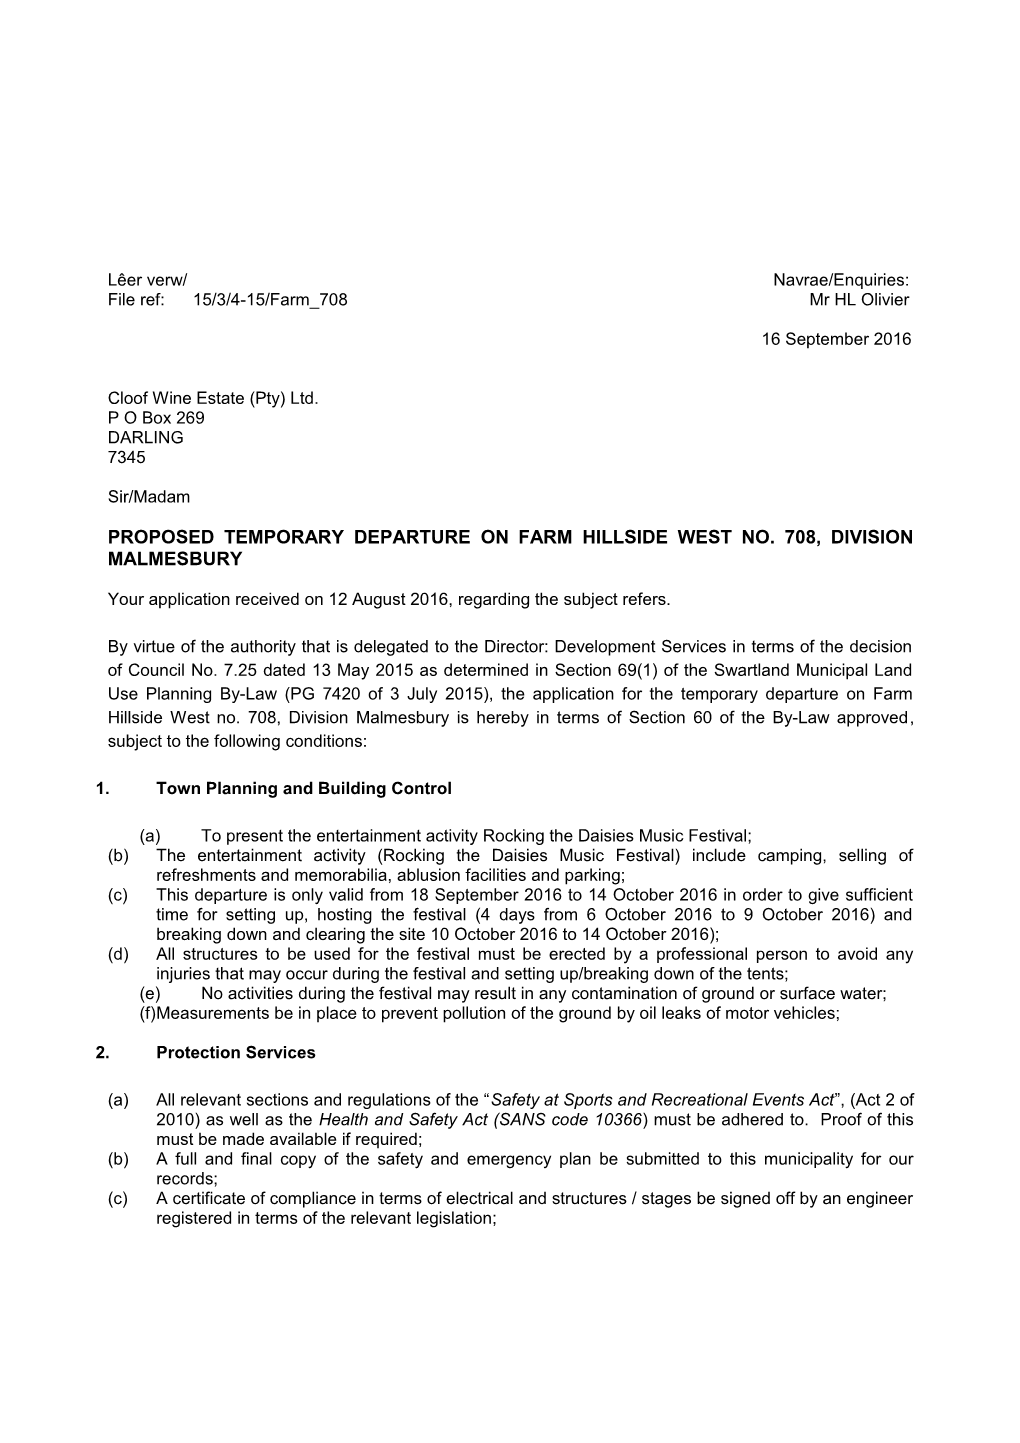 Proposed Temporary Departure on Farm Hillside West No. 708, Division Malmesbury